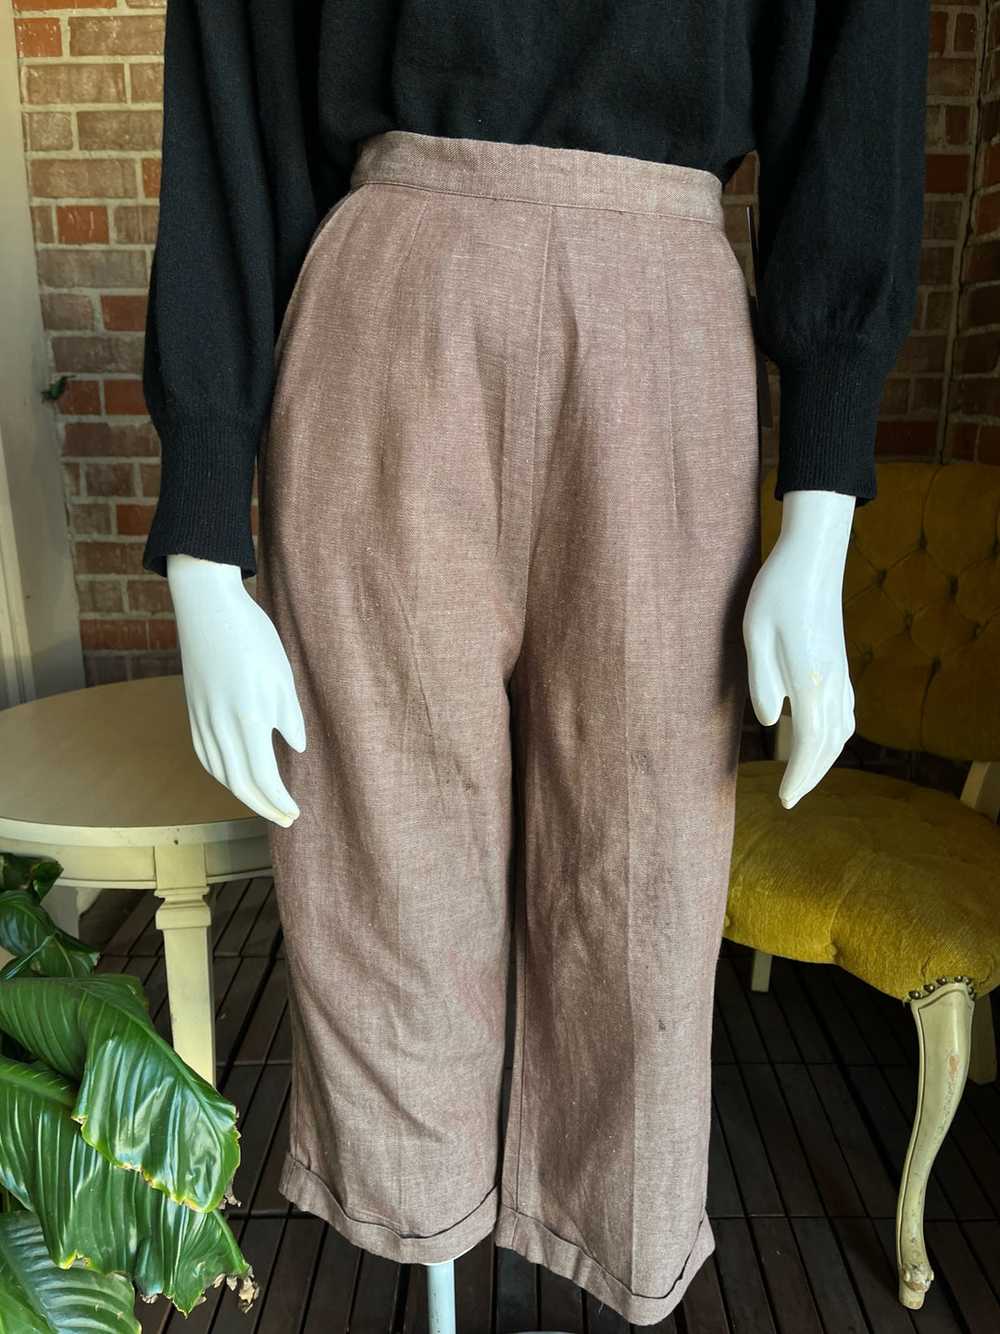 1950s Deadstock Taupe Clam Digger Pants - image 3